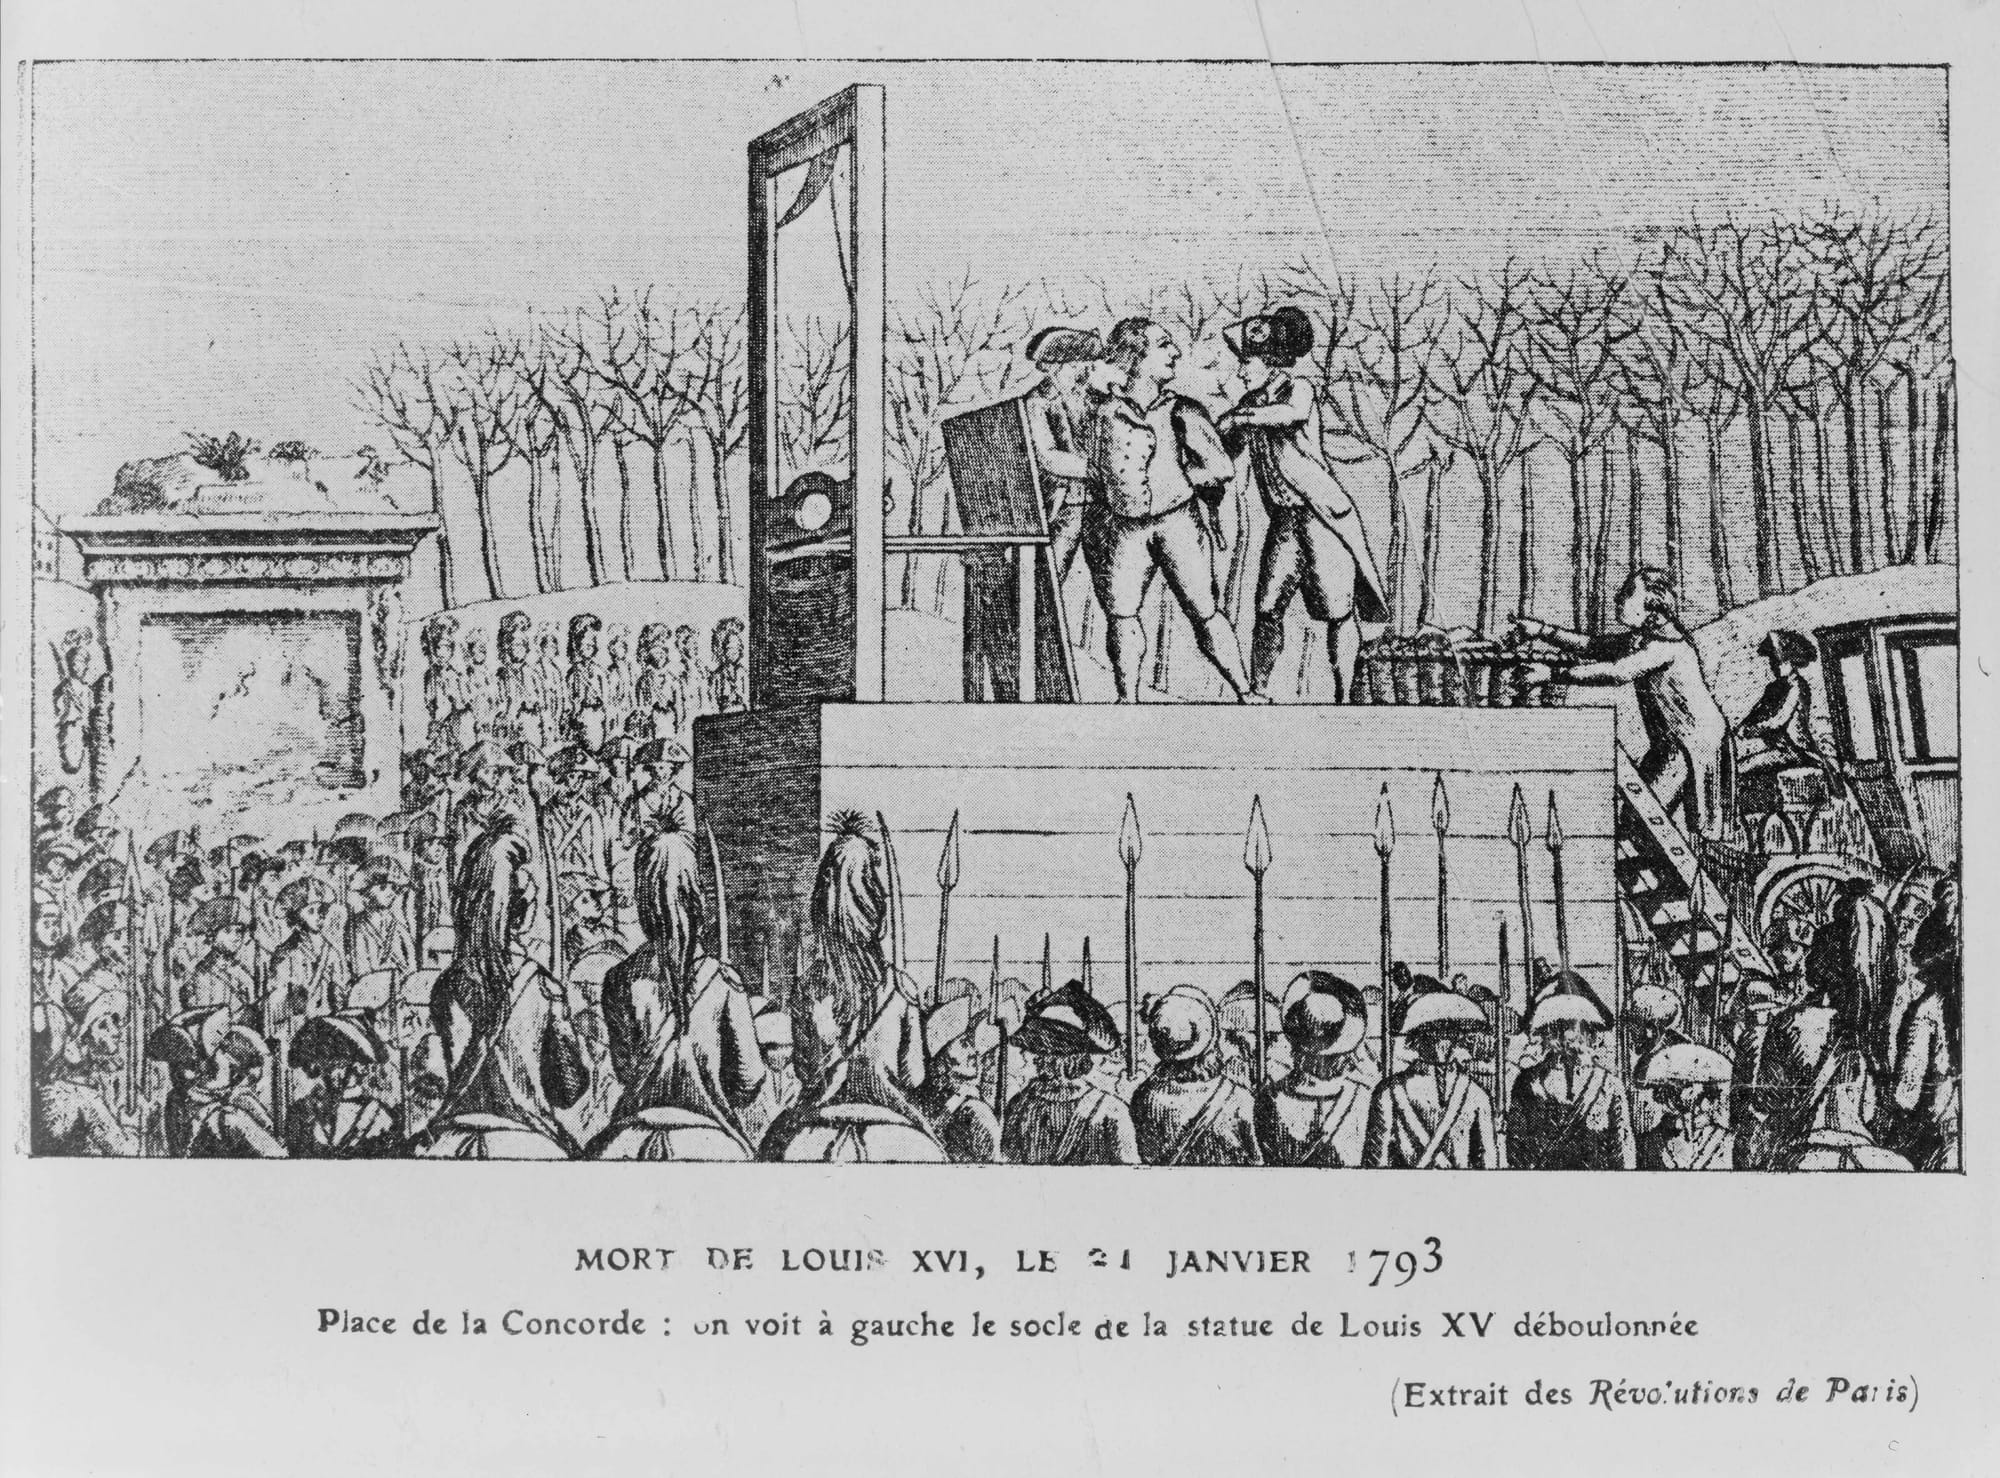 Black and white line art of the grim scene. Rows of soldiers holding spears surrounded the gallows platform as Louis is prepared for his end.